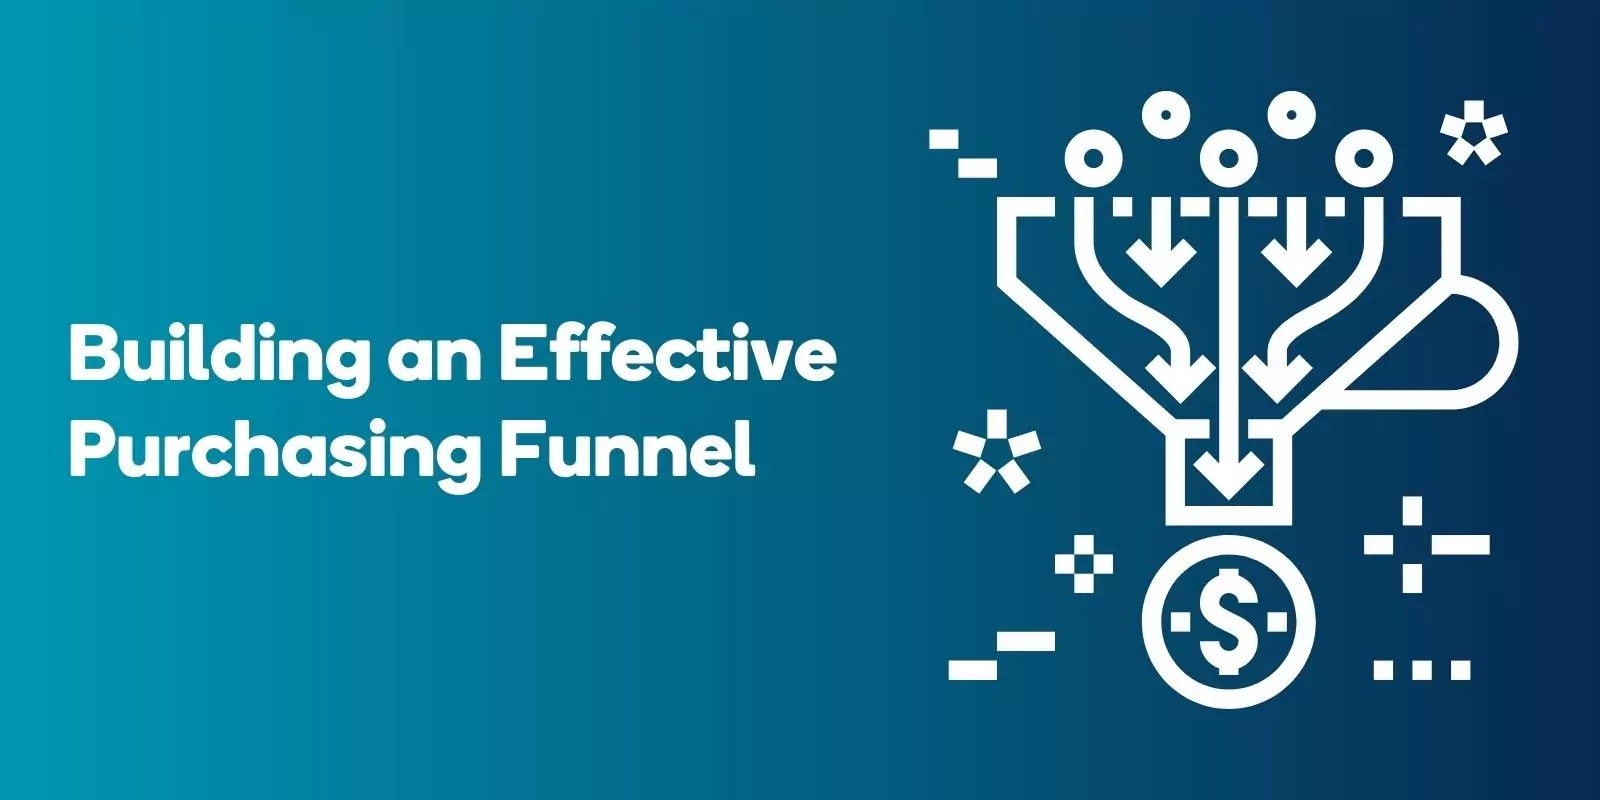 Building an Effective Purchasing Funnel